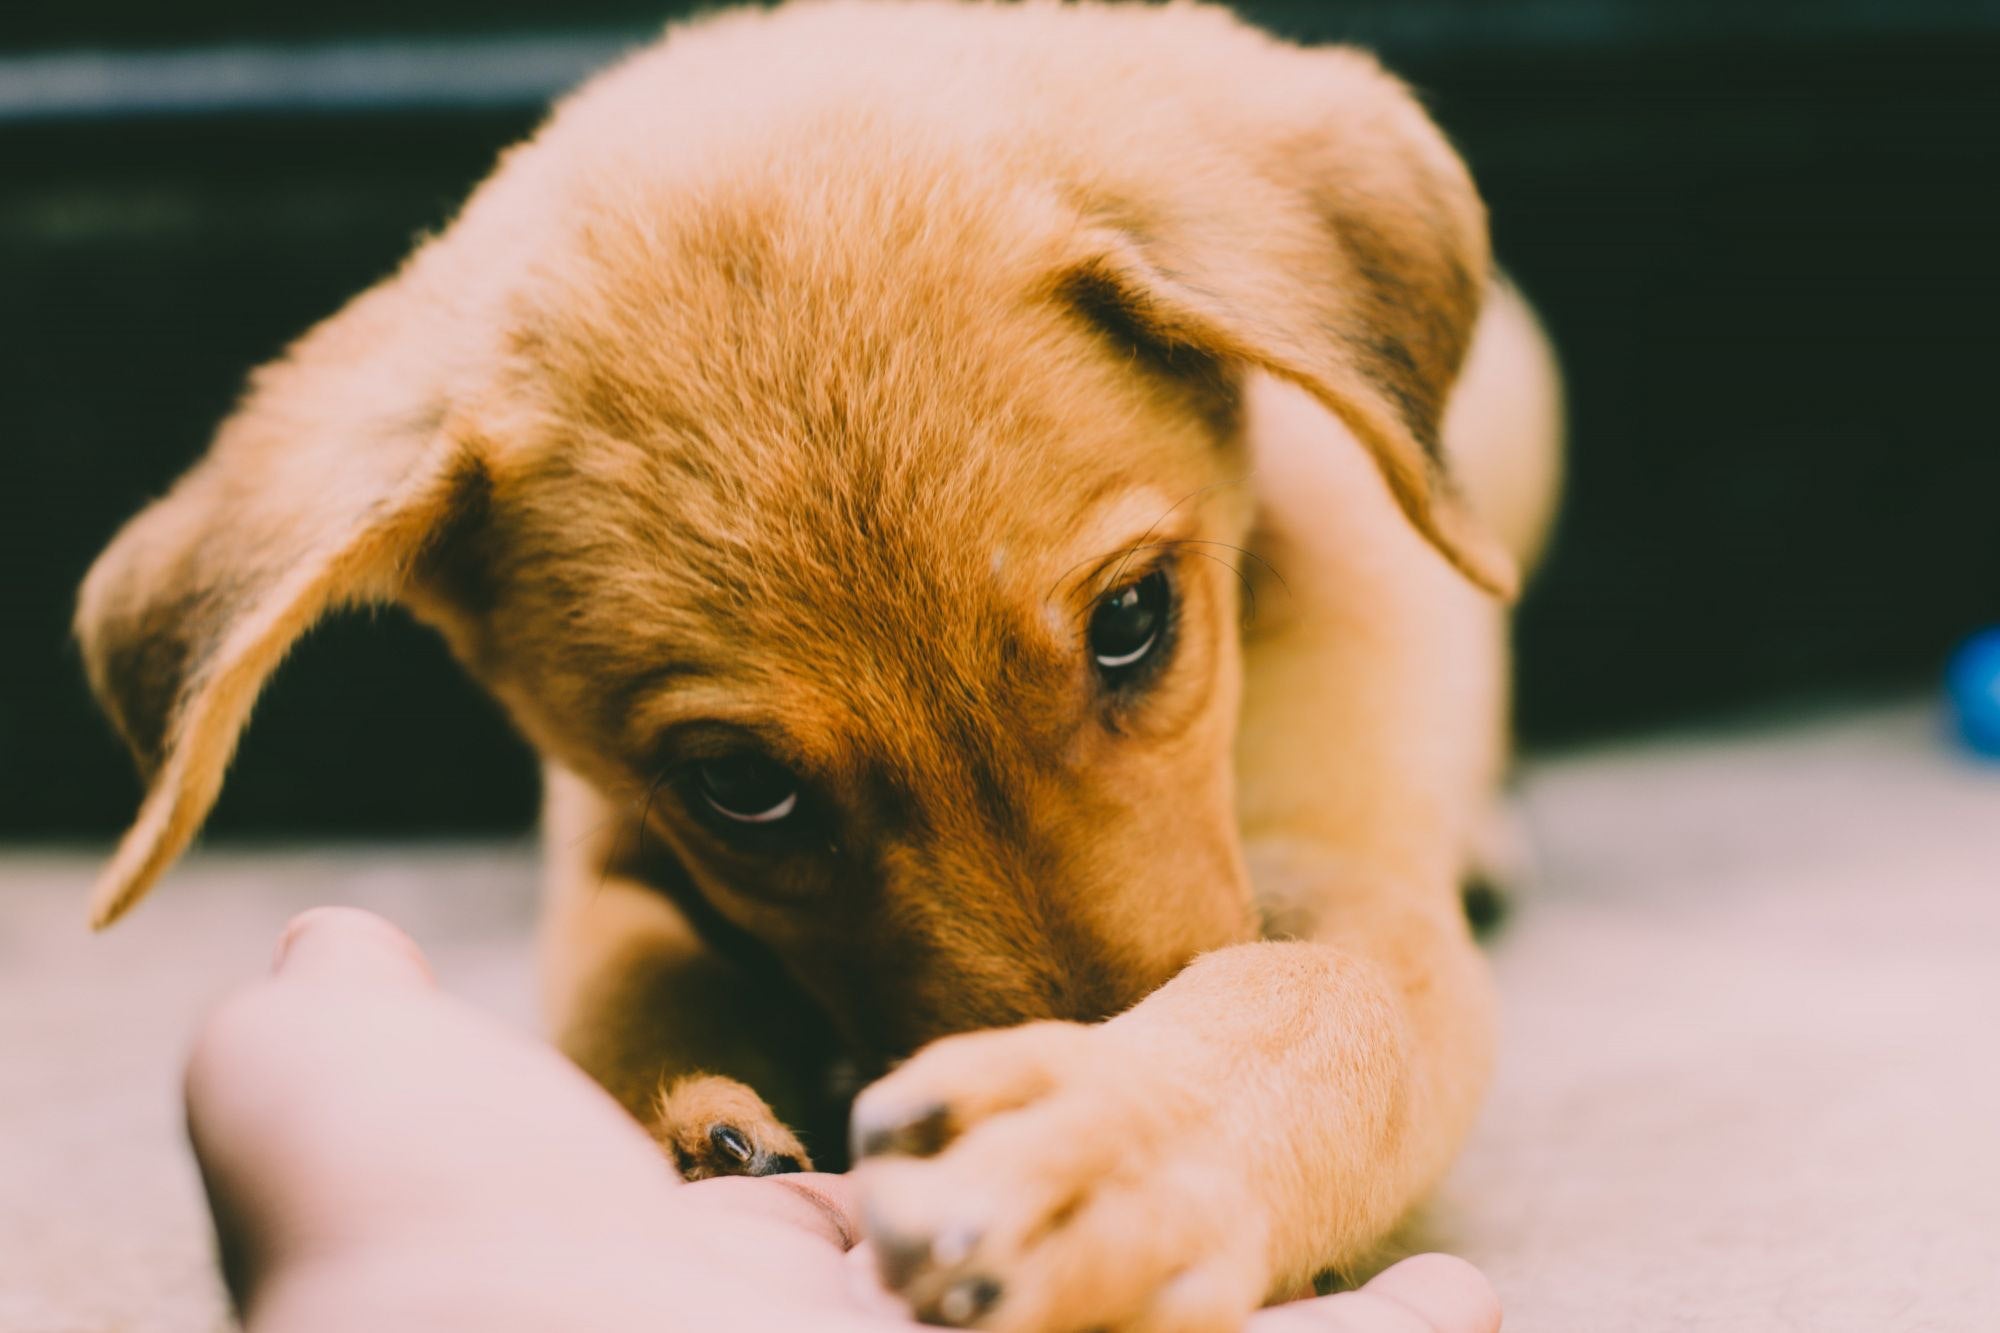 Is Your Puppy Ready for Adult Dog Food?